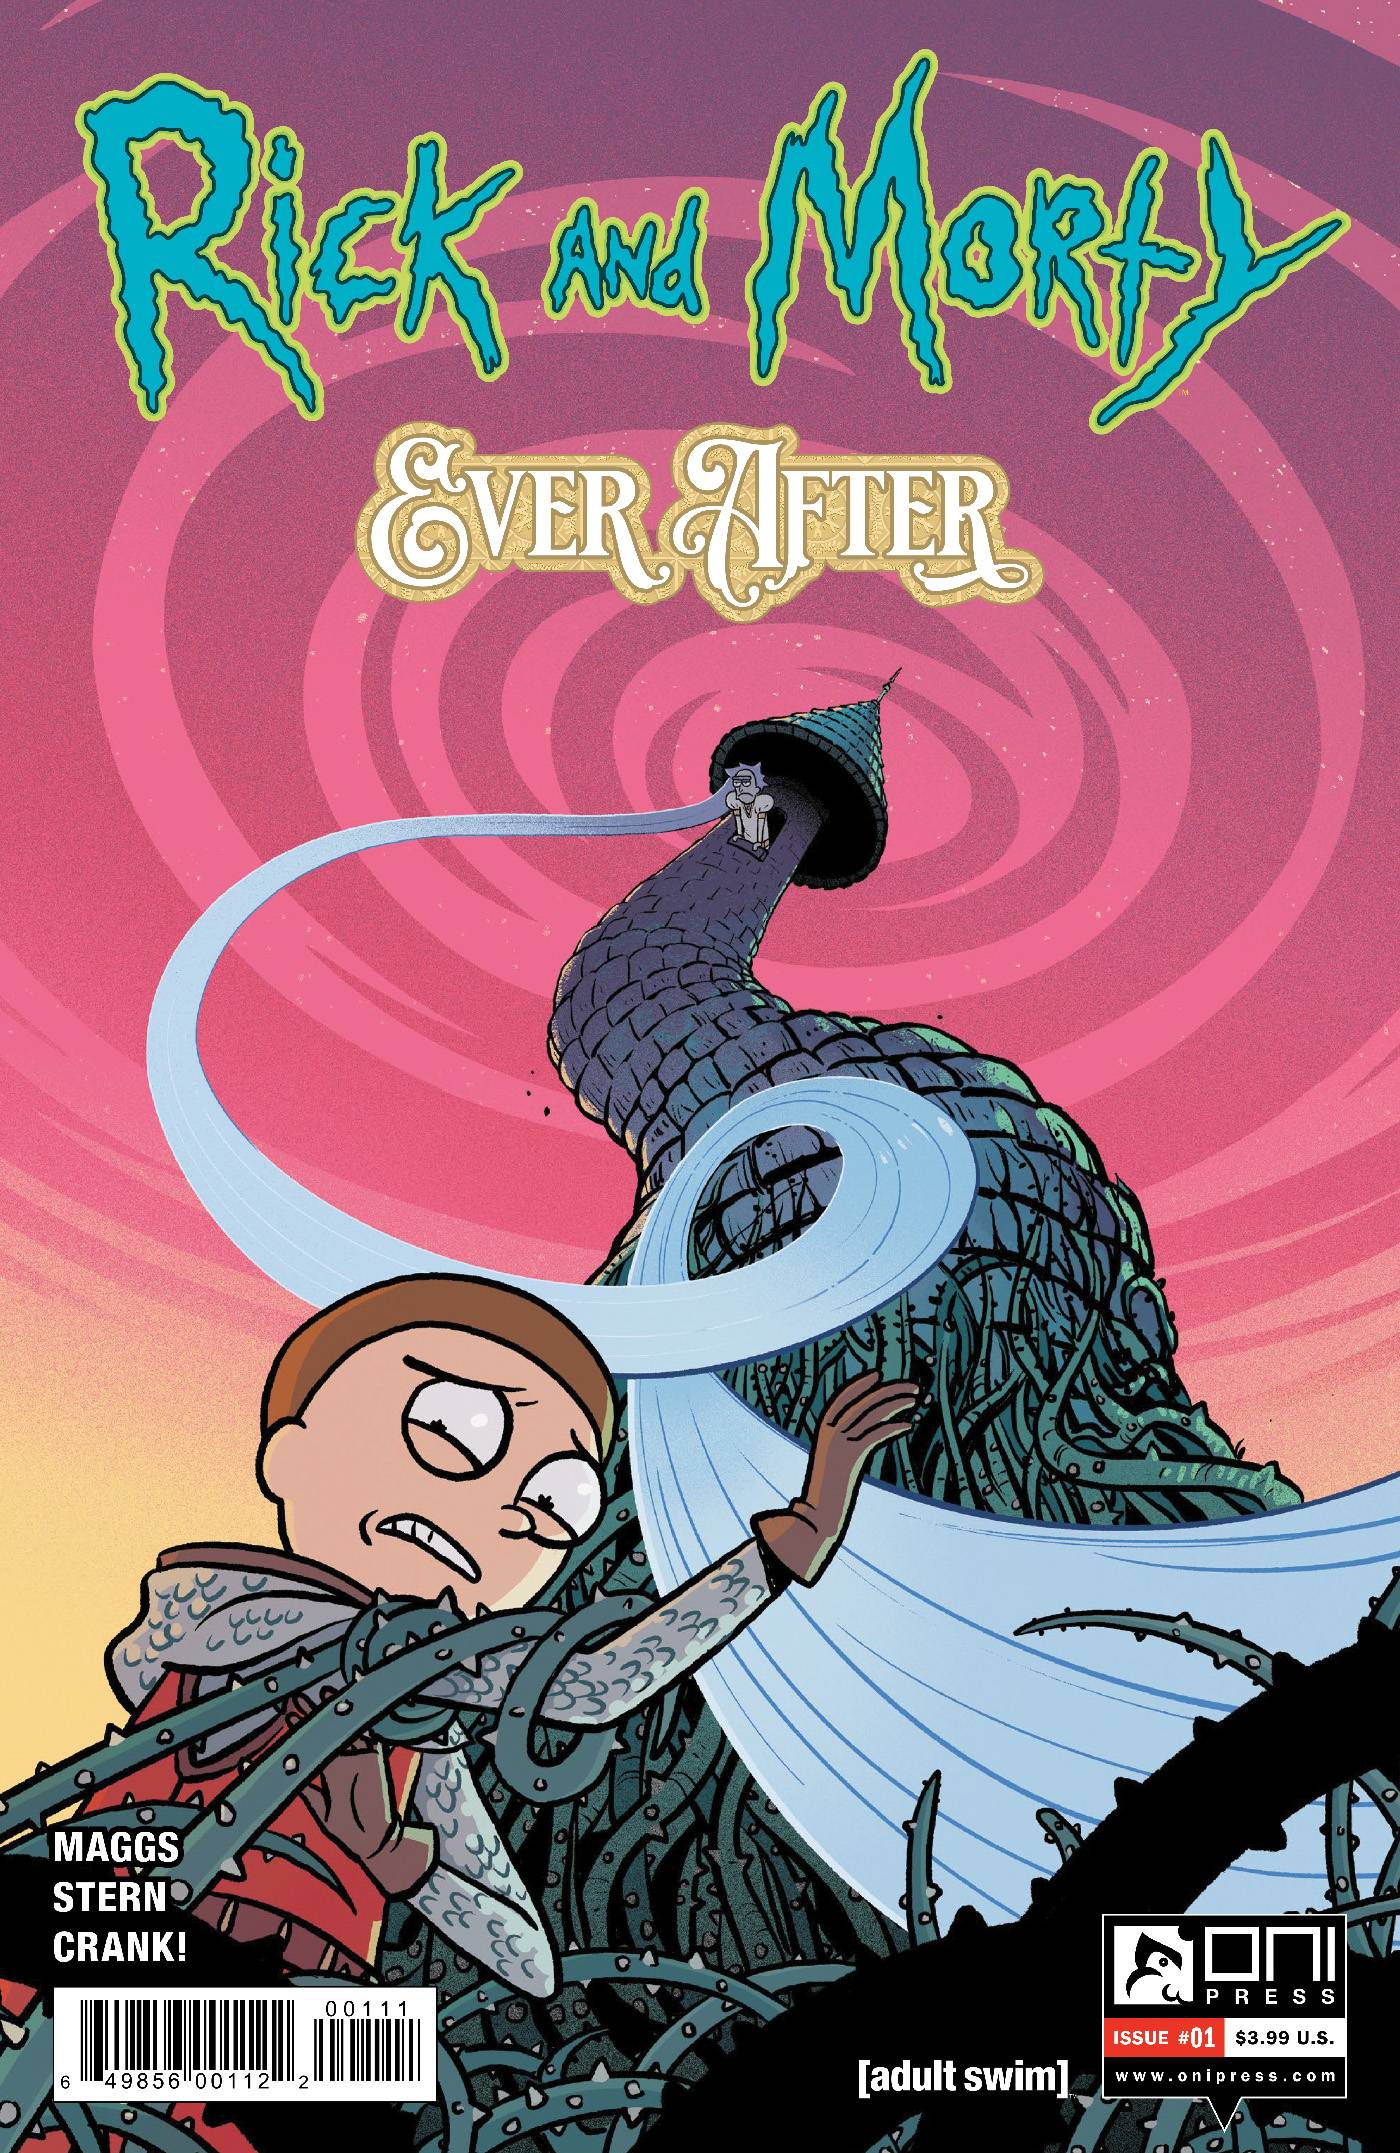 RICK & MORTY EVER AFTER #1 CVR A | Game Master's Emporium (The New GME)